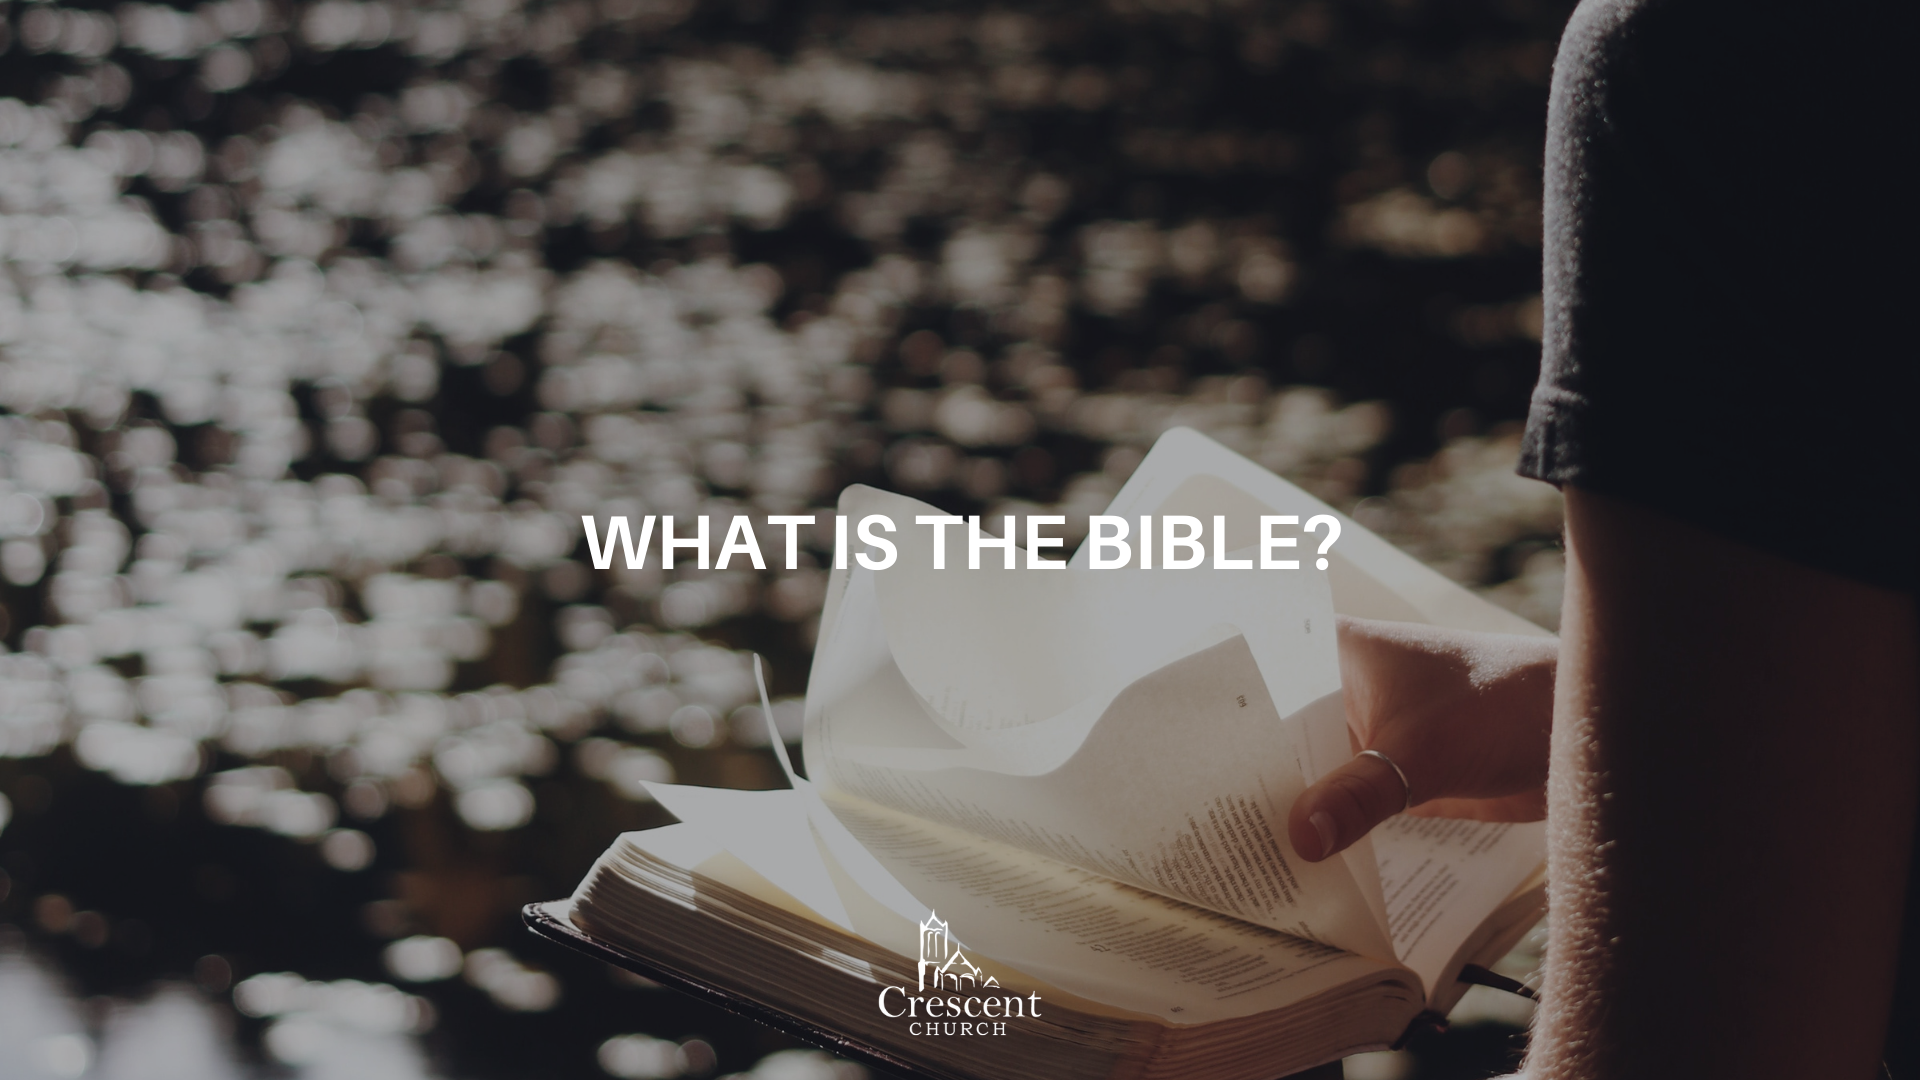 What is the bible?